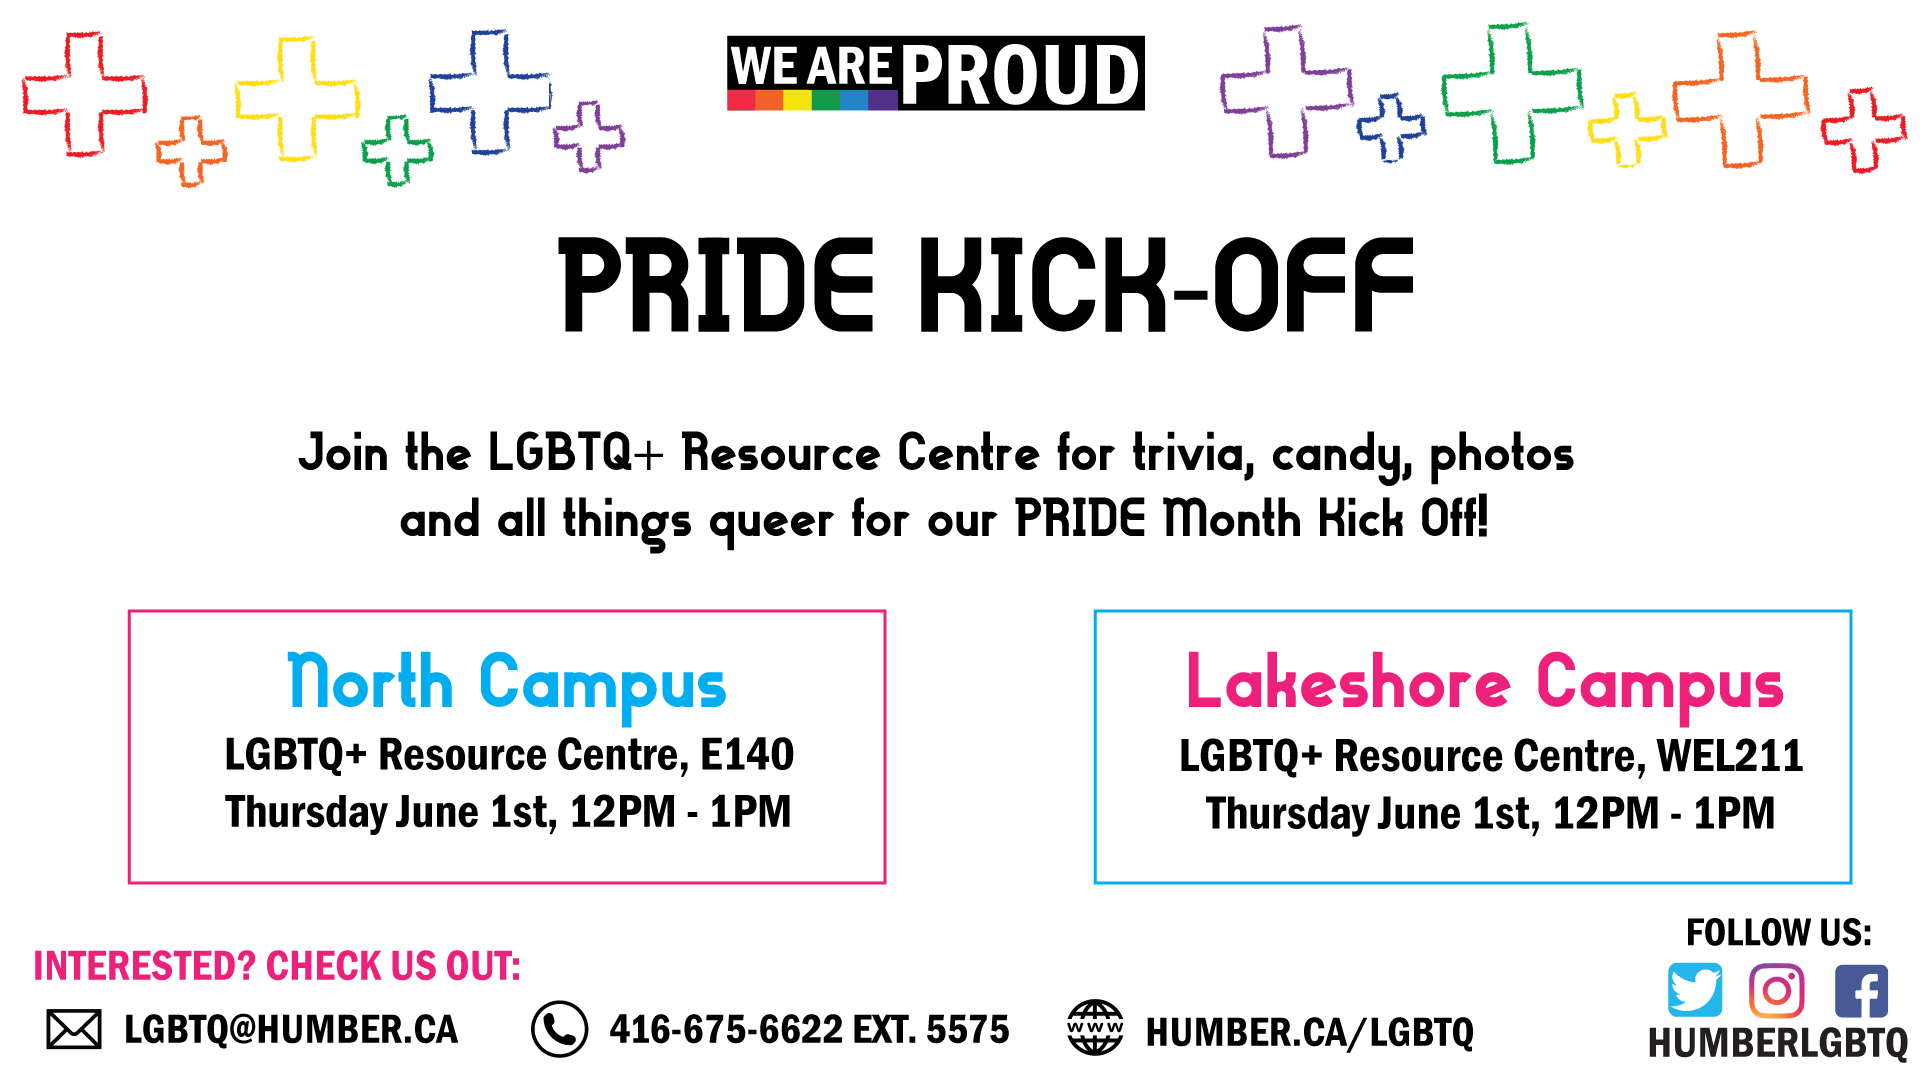 Join the LGBTQ+ Resource Centre for trivia, candy, photos and all things queer for our Pride Month Kick Off!